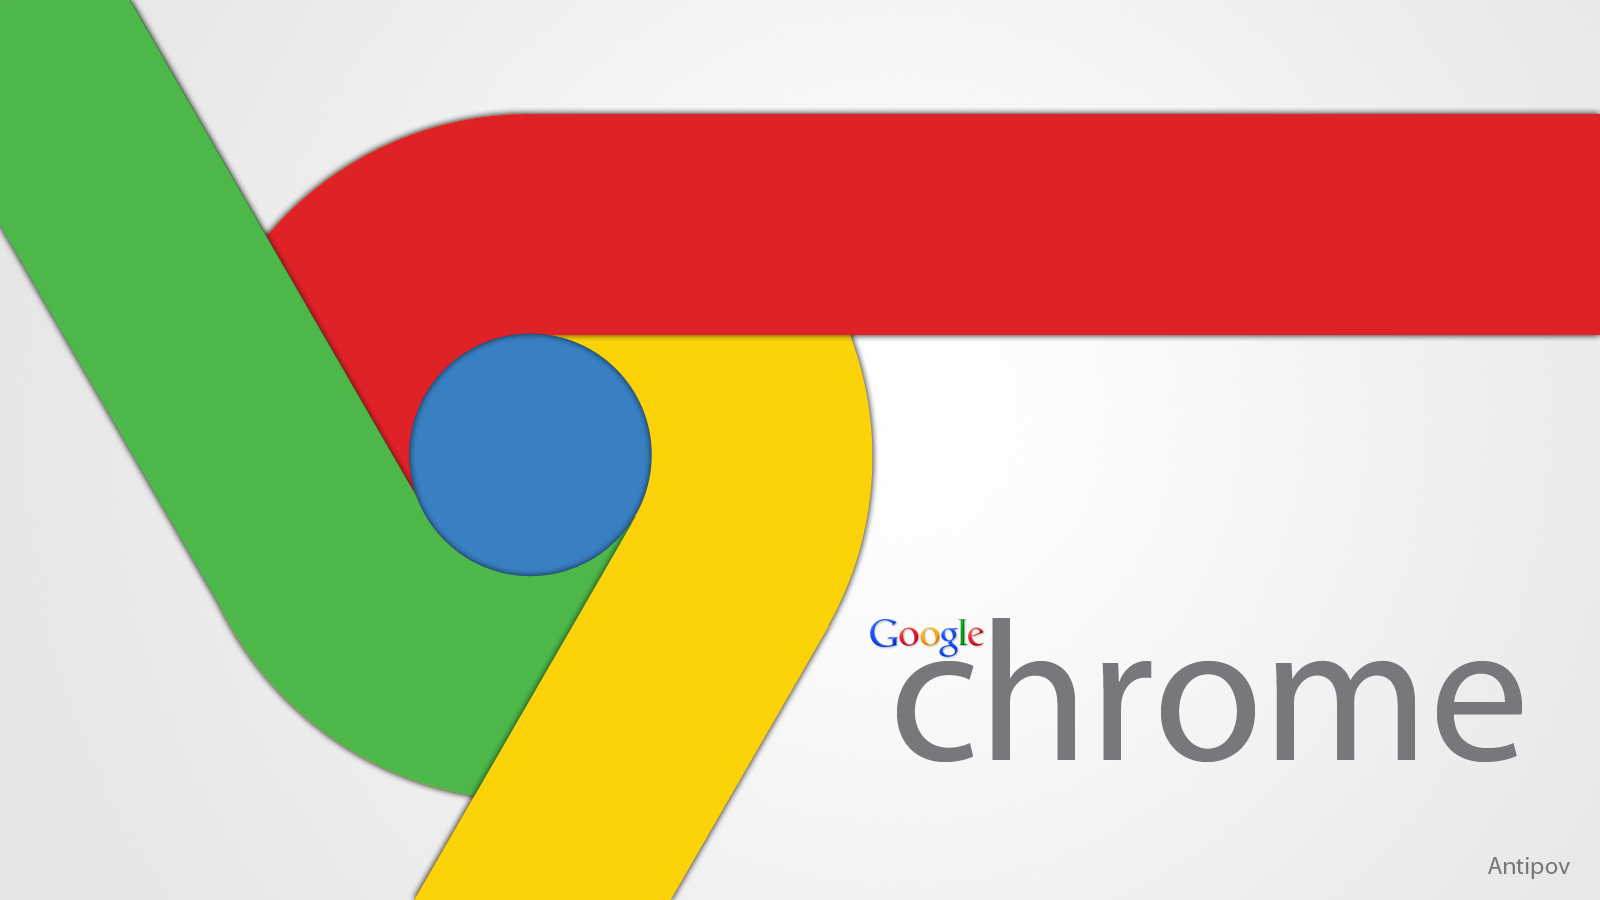 Amazing Google Chrome Pictures & Backgrounds